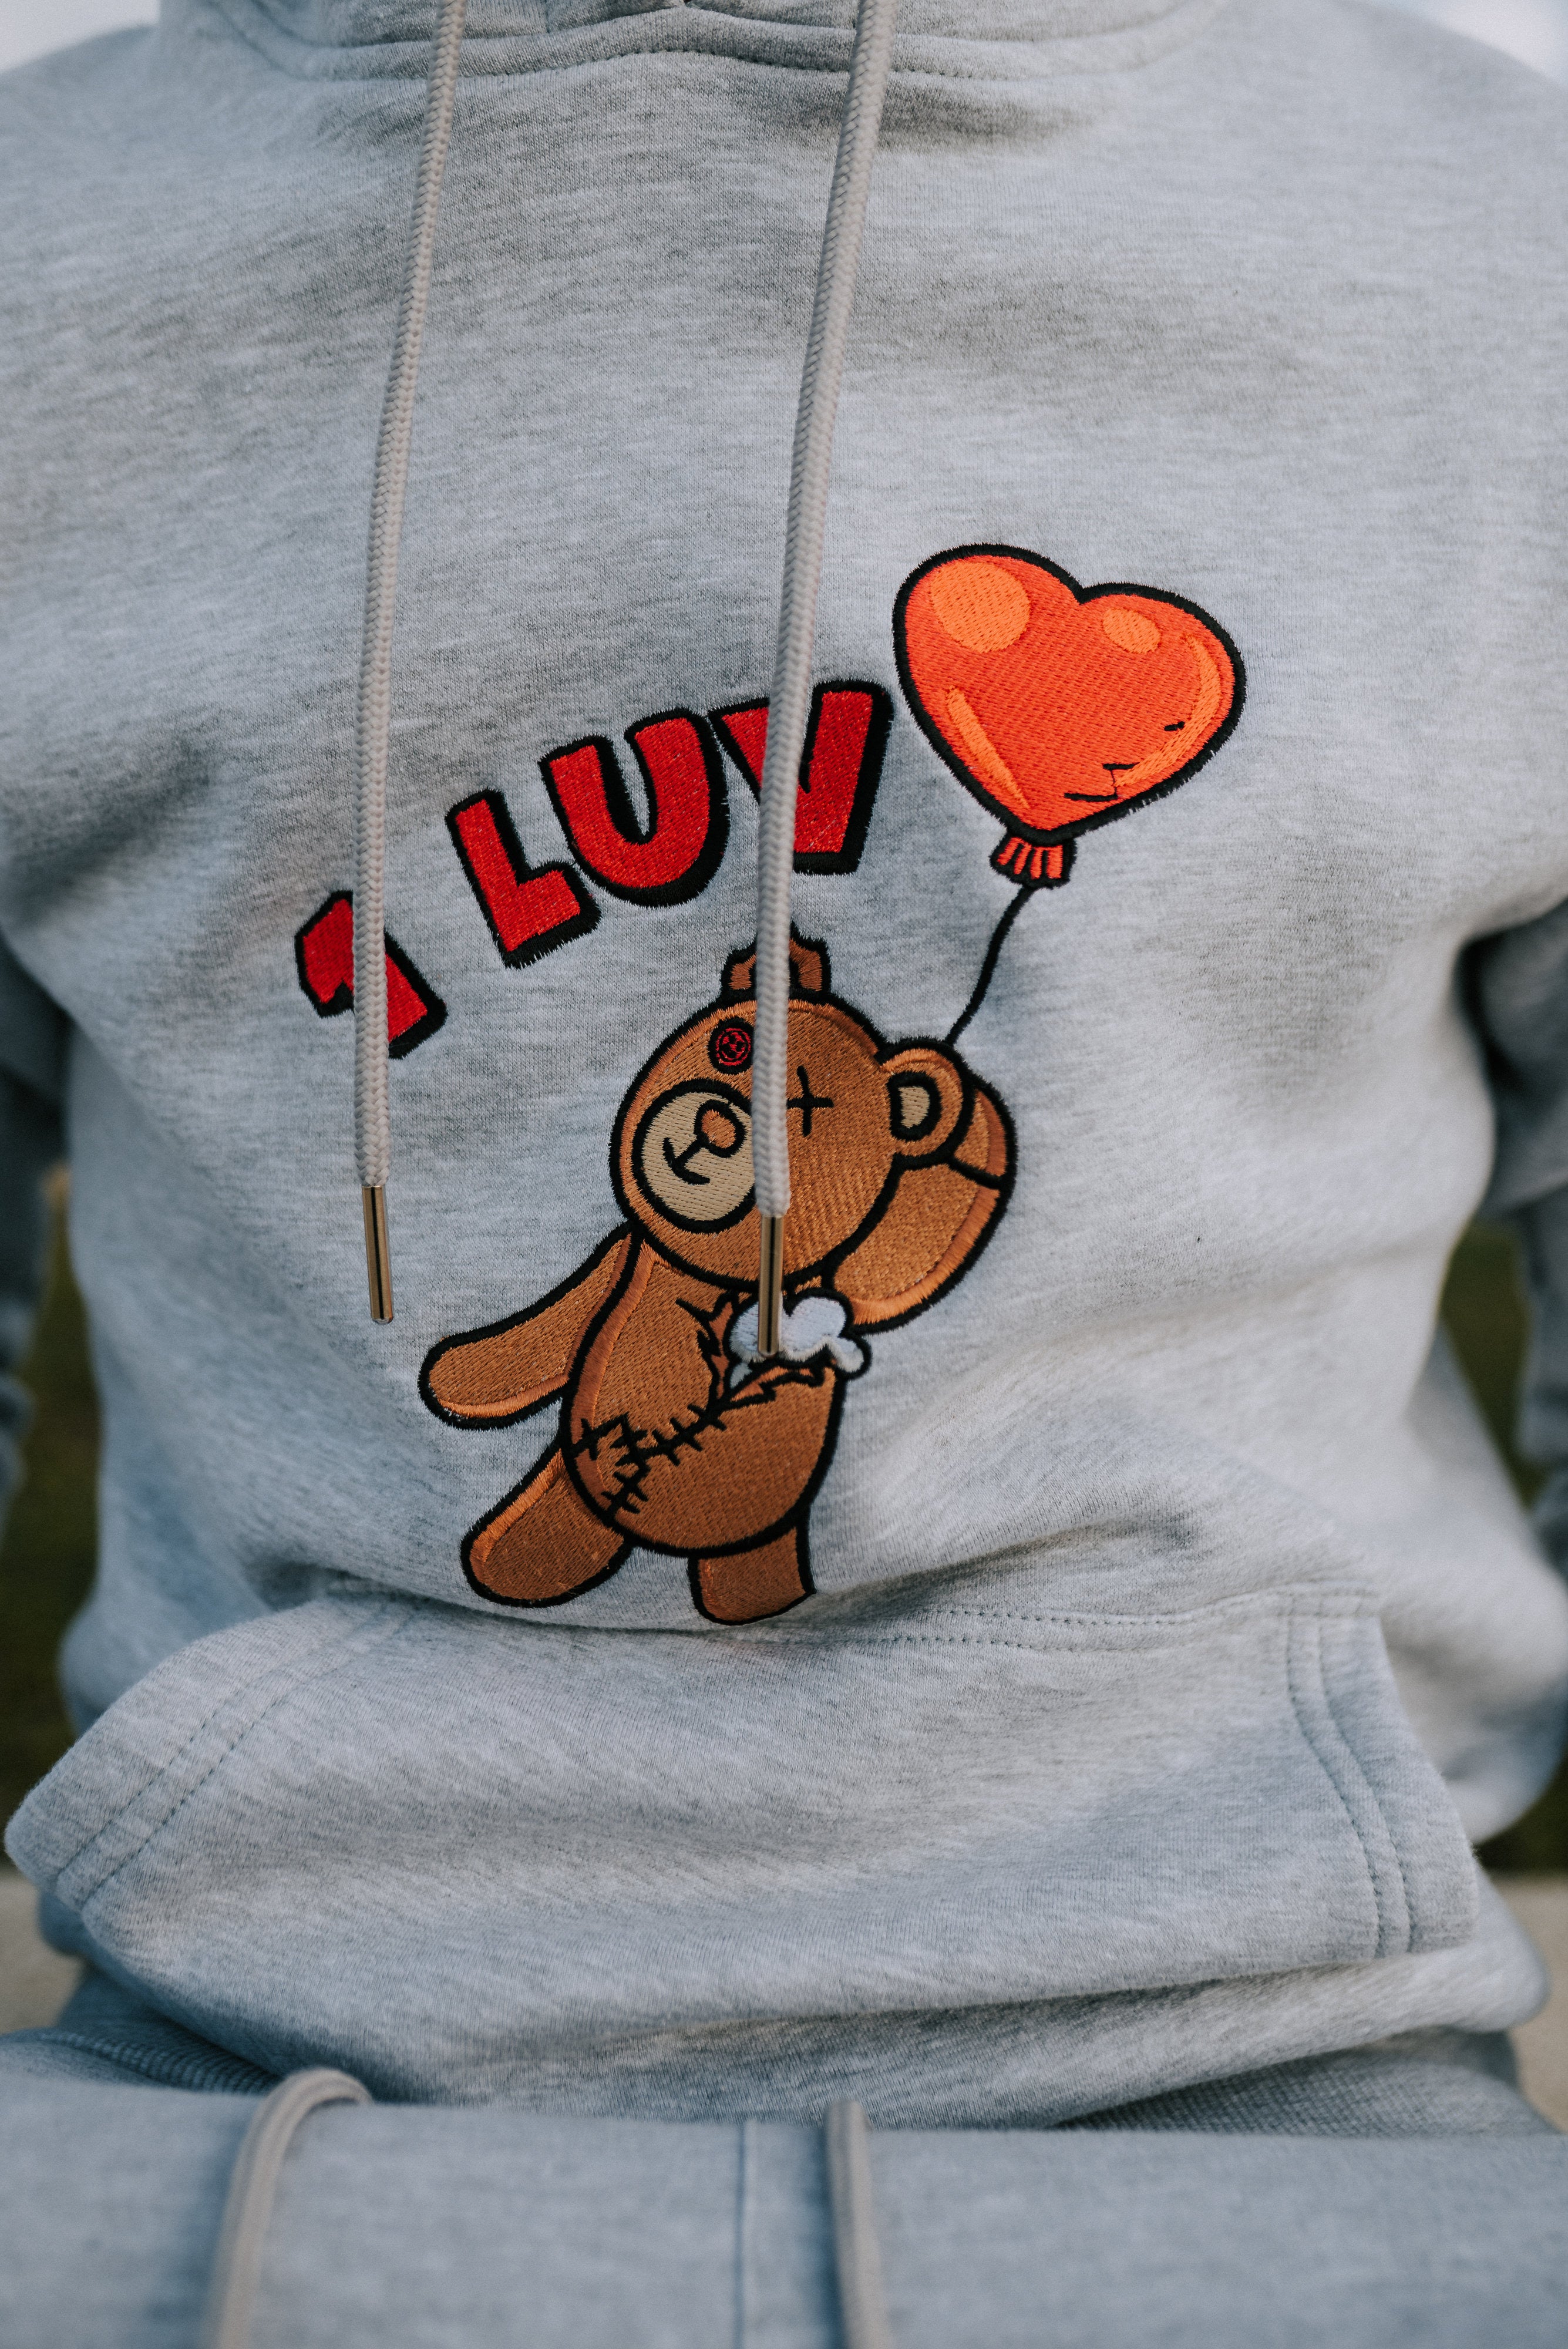 1Luv “Stealth Gray” Jogging Suit (Kids)